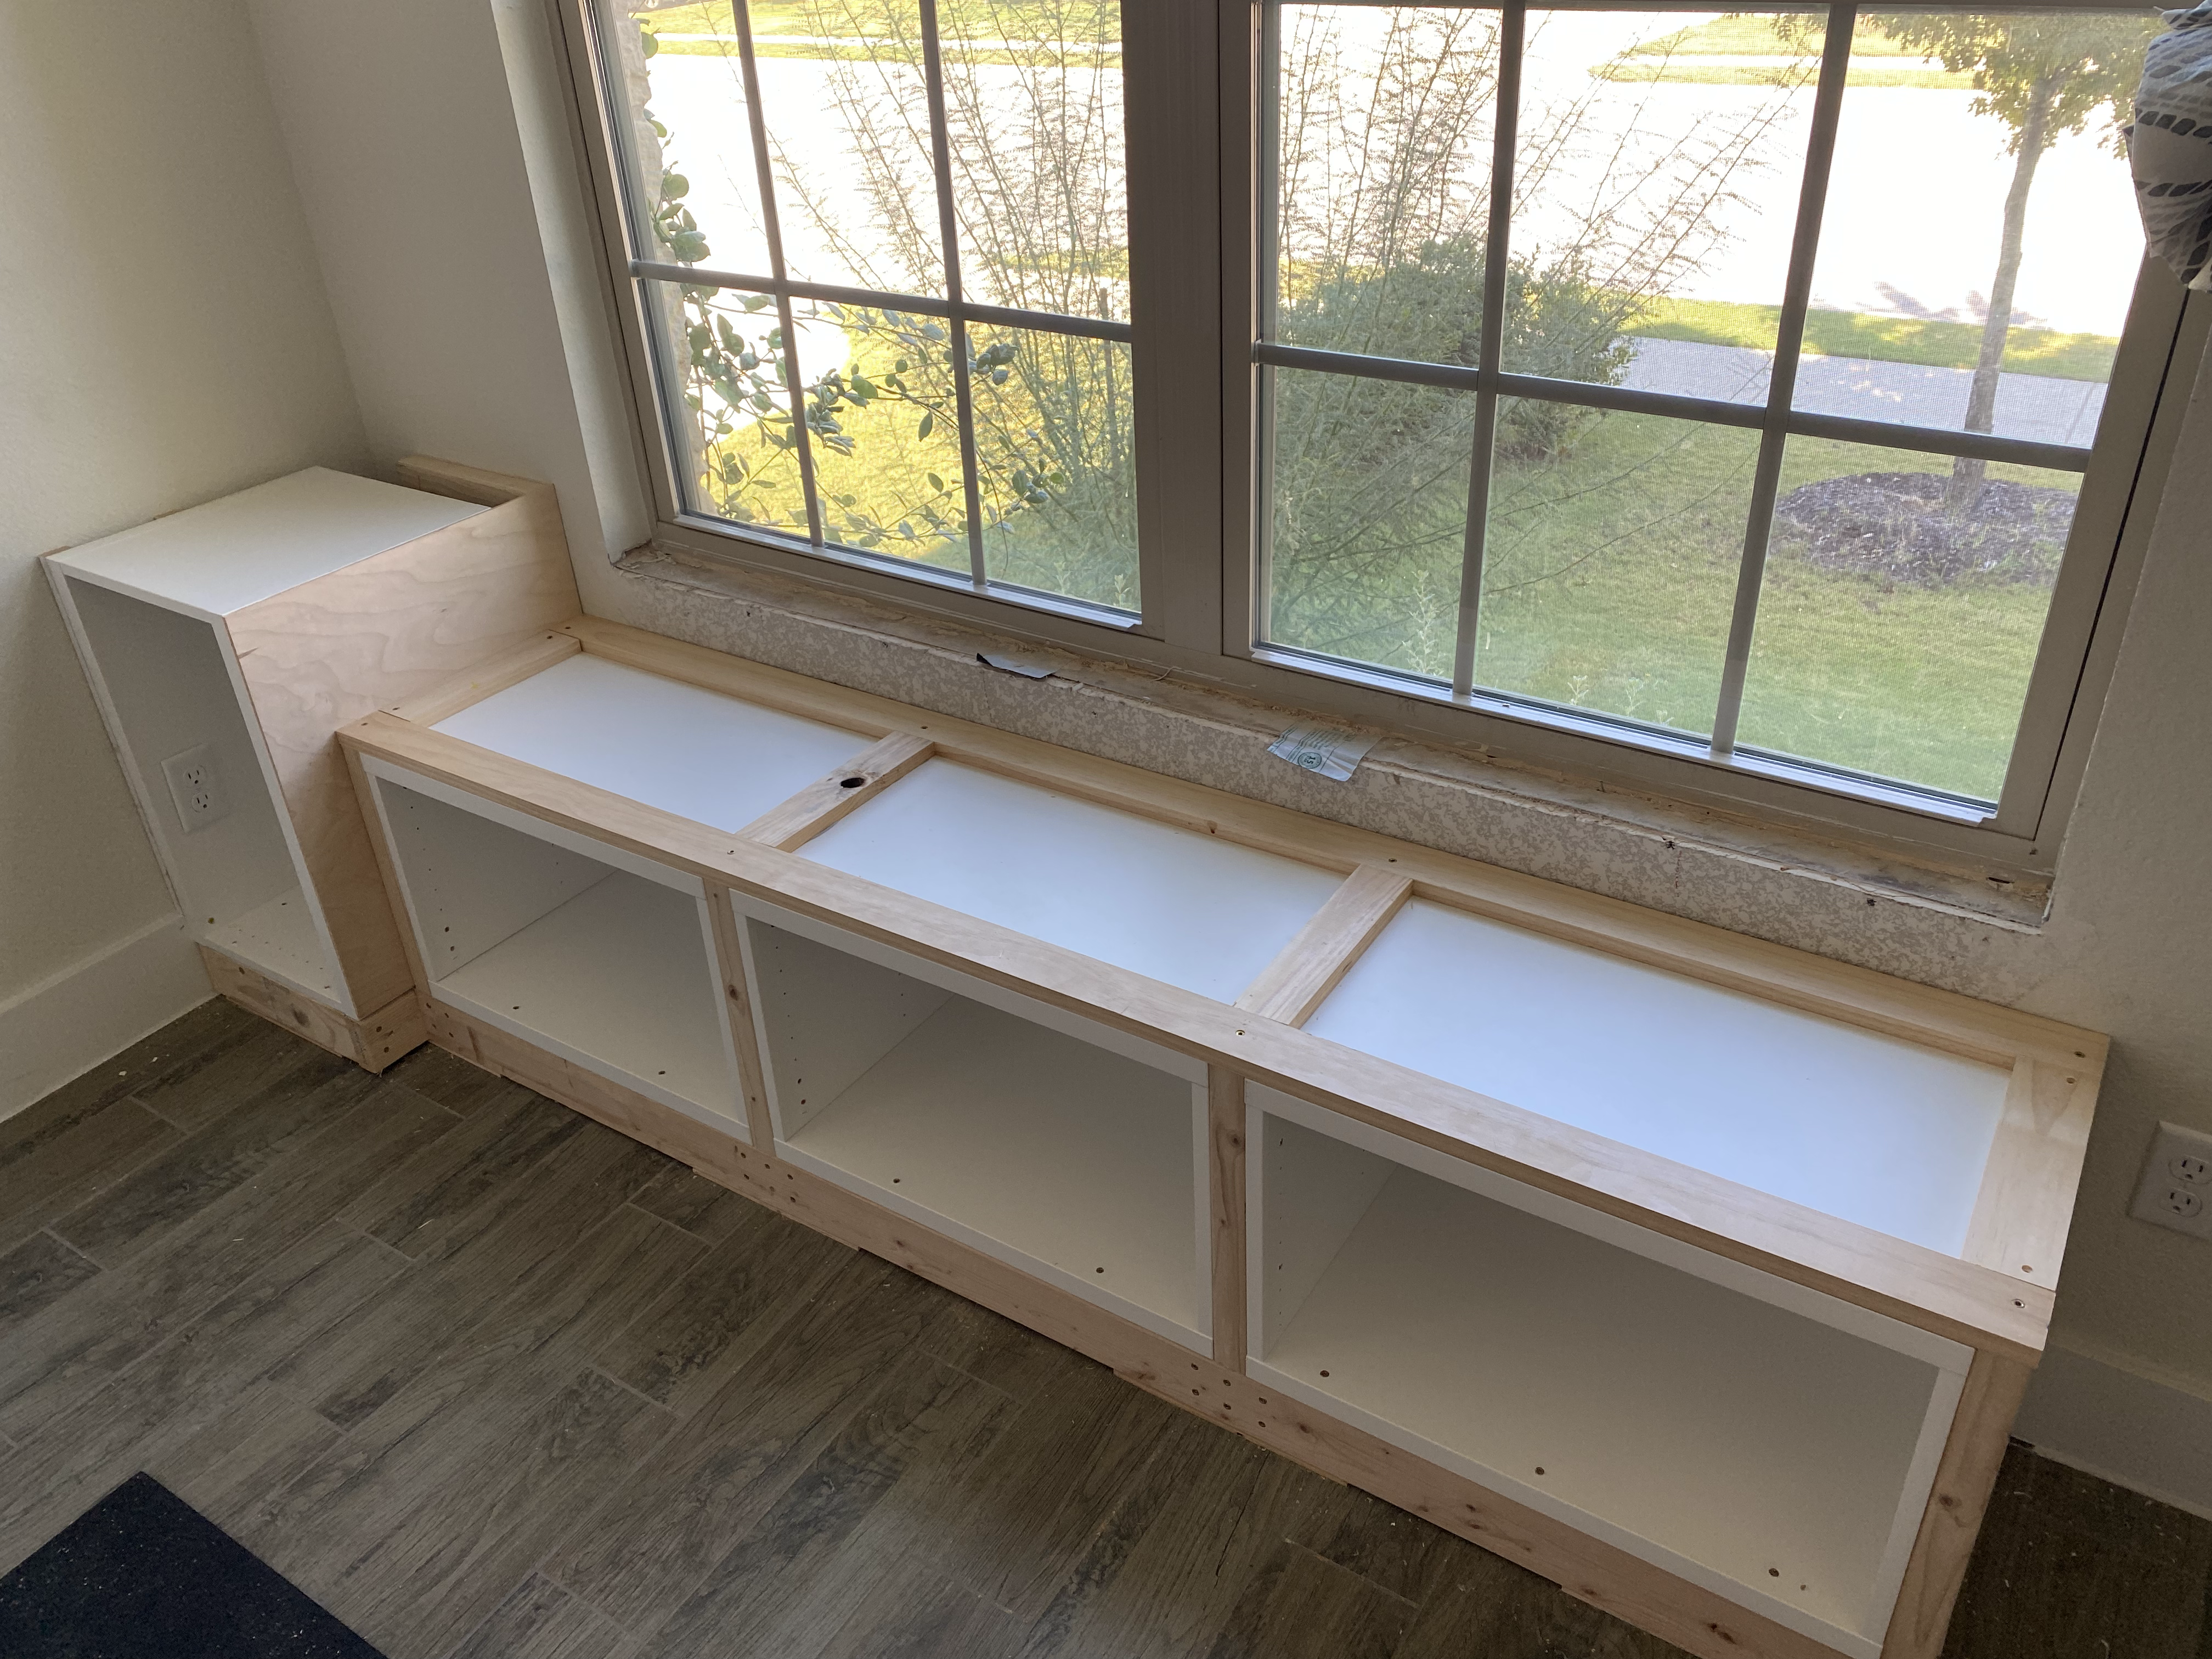 cabinets for the window seat